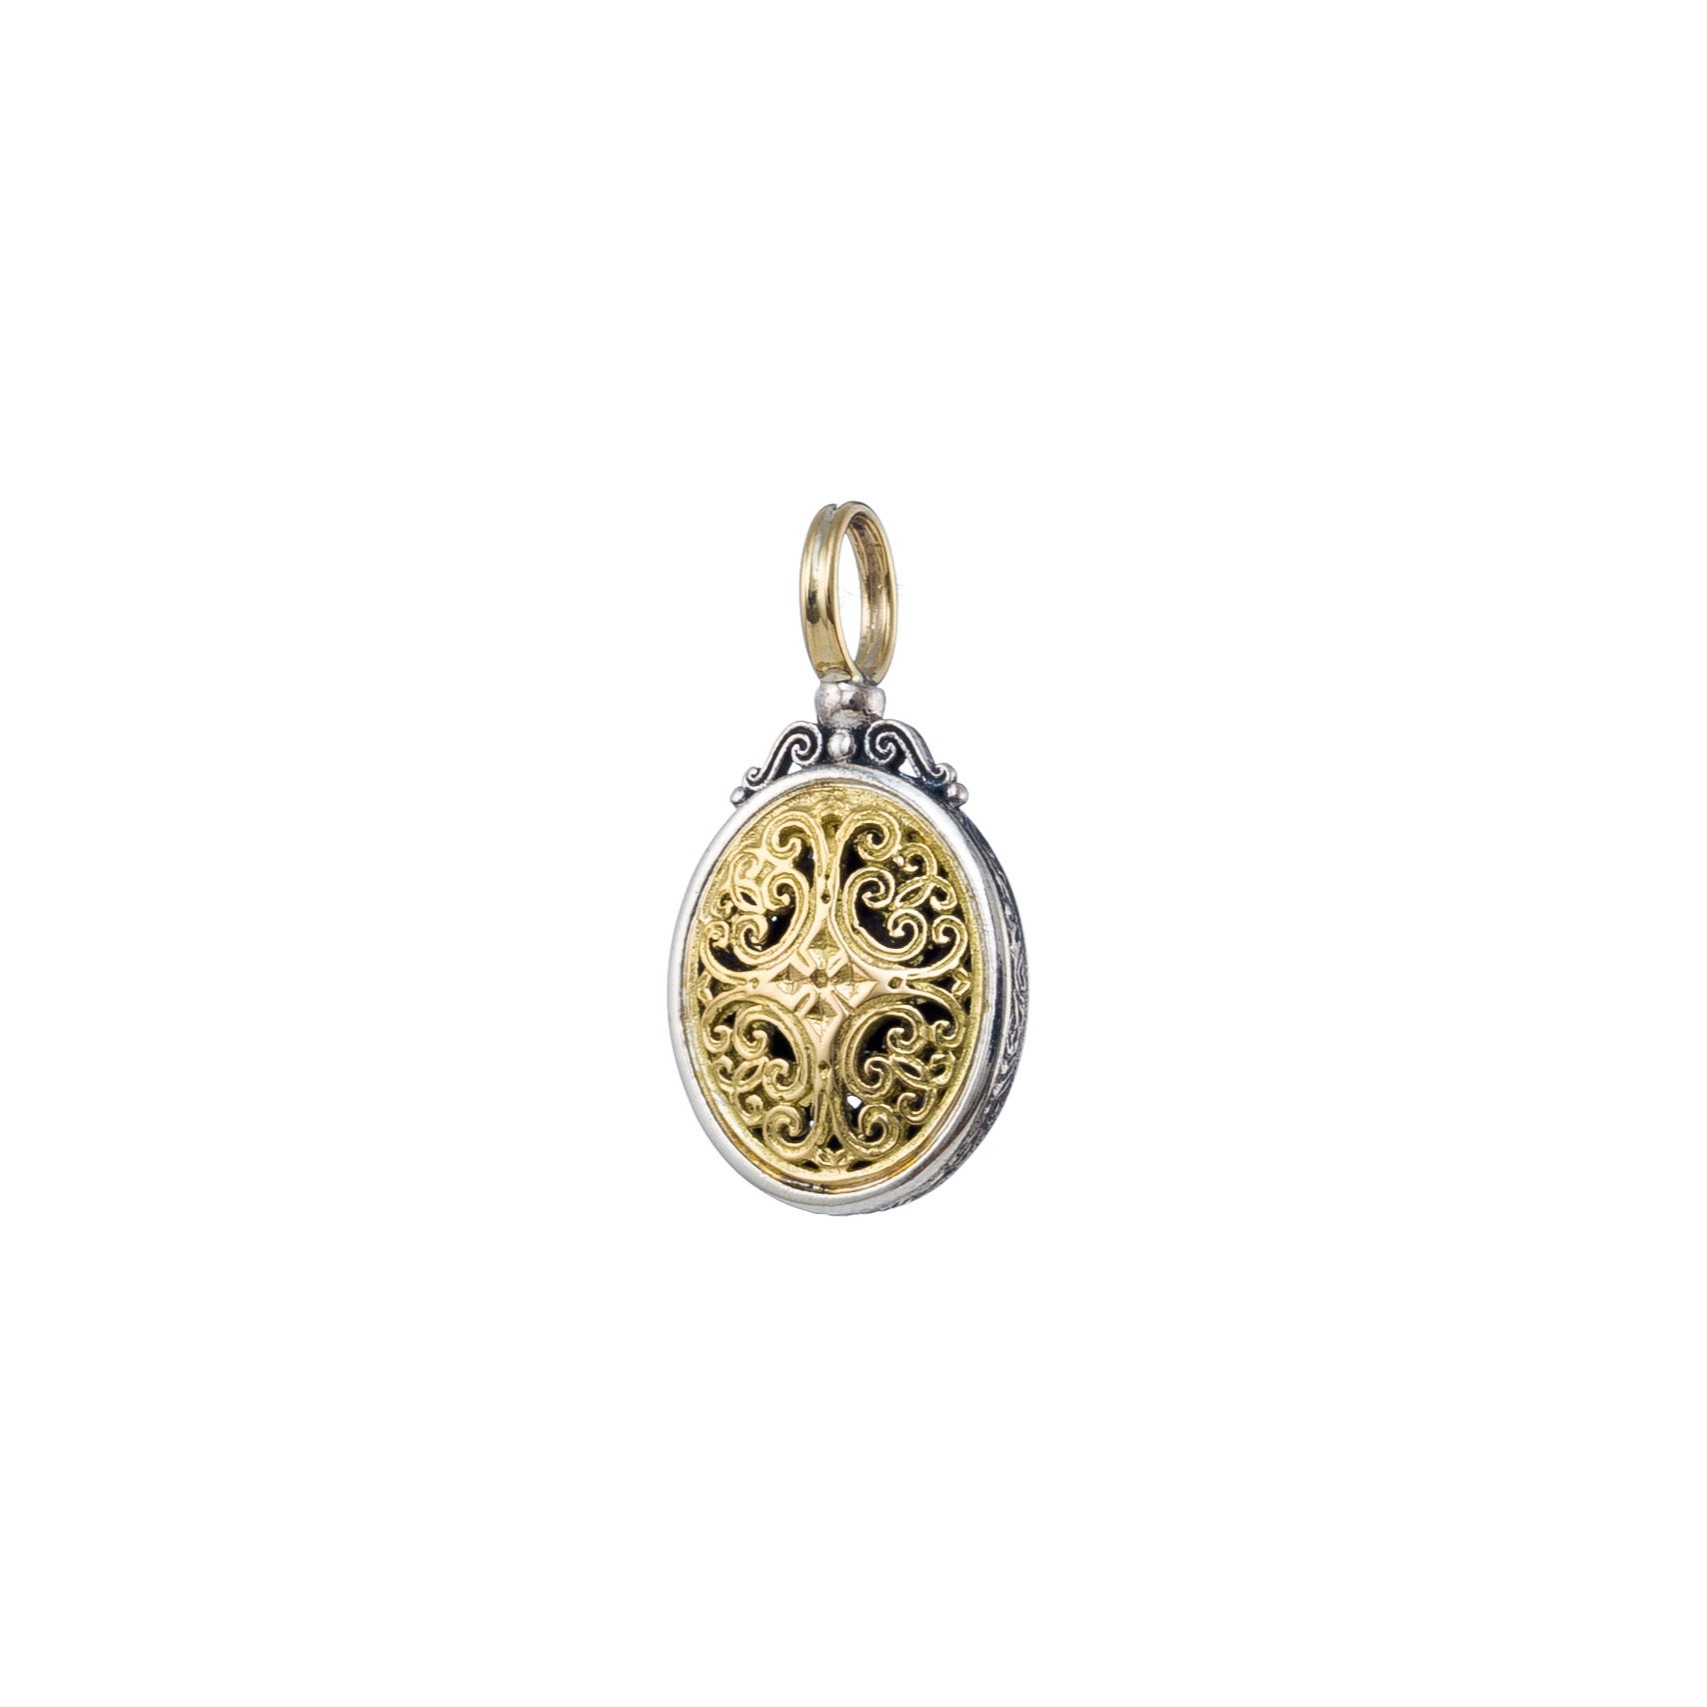 Mediterranean oval pendant in 18K Gold and Sterling Silver